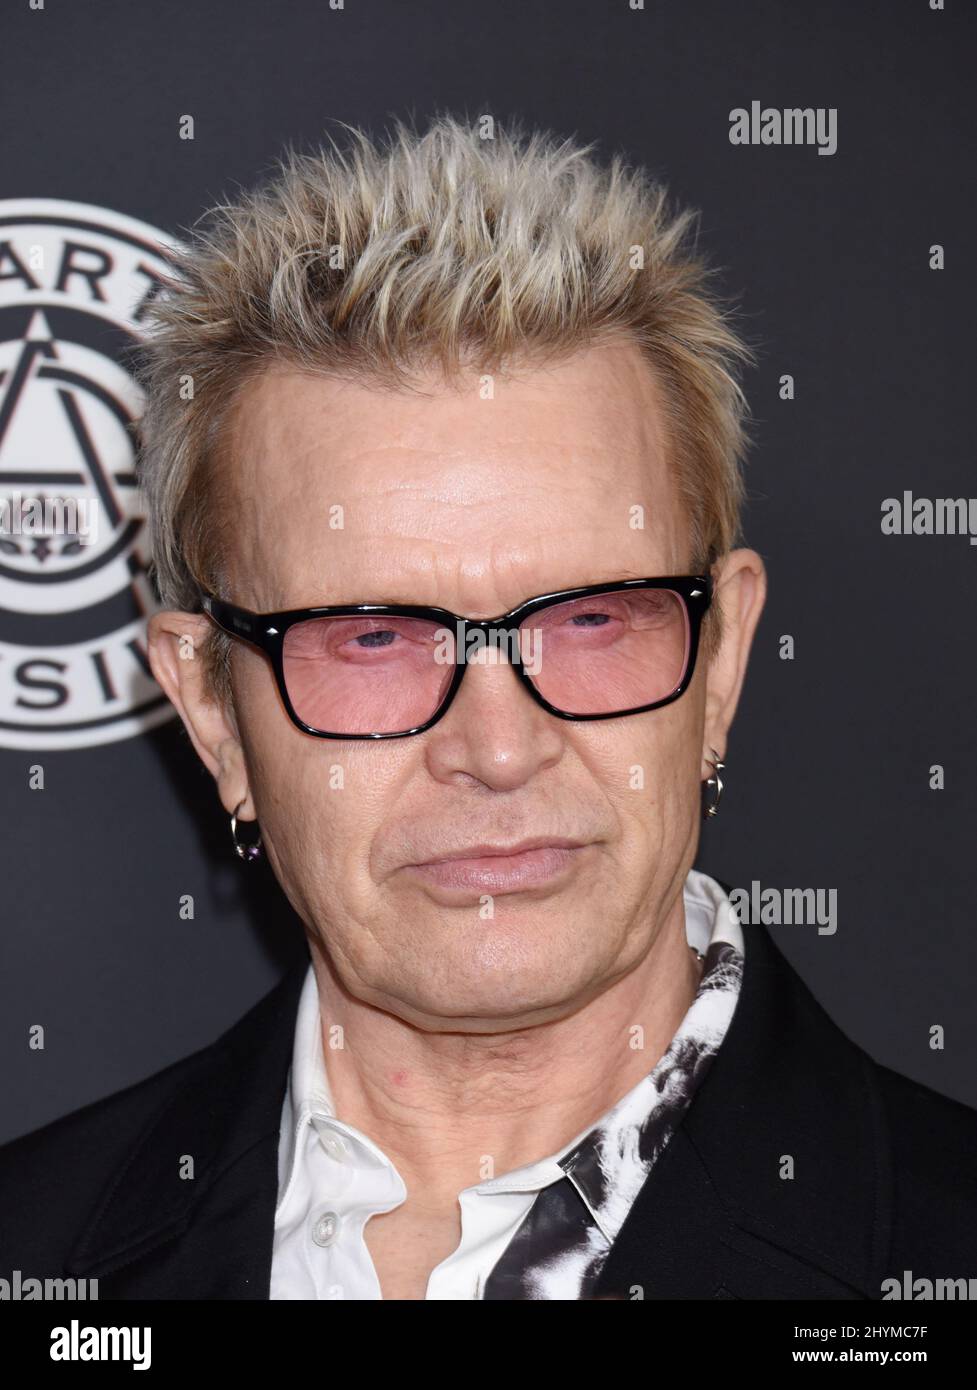 Billy Idol at The Art of Elysium 13th Annual Black Tie Artistic Experience 'HEAVEN' held at The Palladium Stock Photo